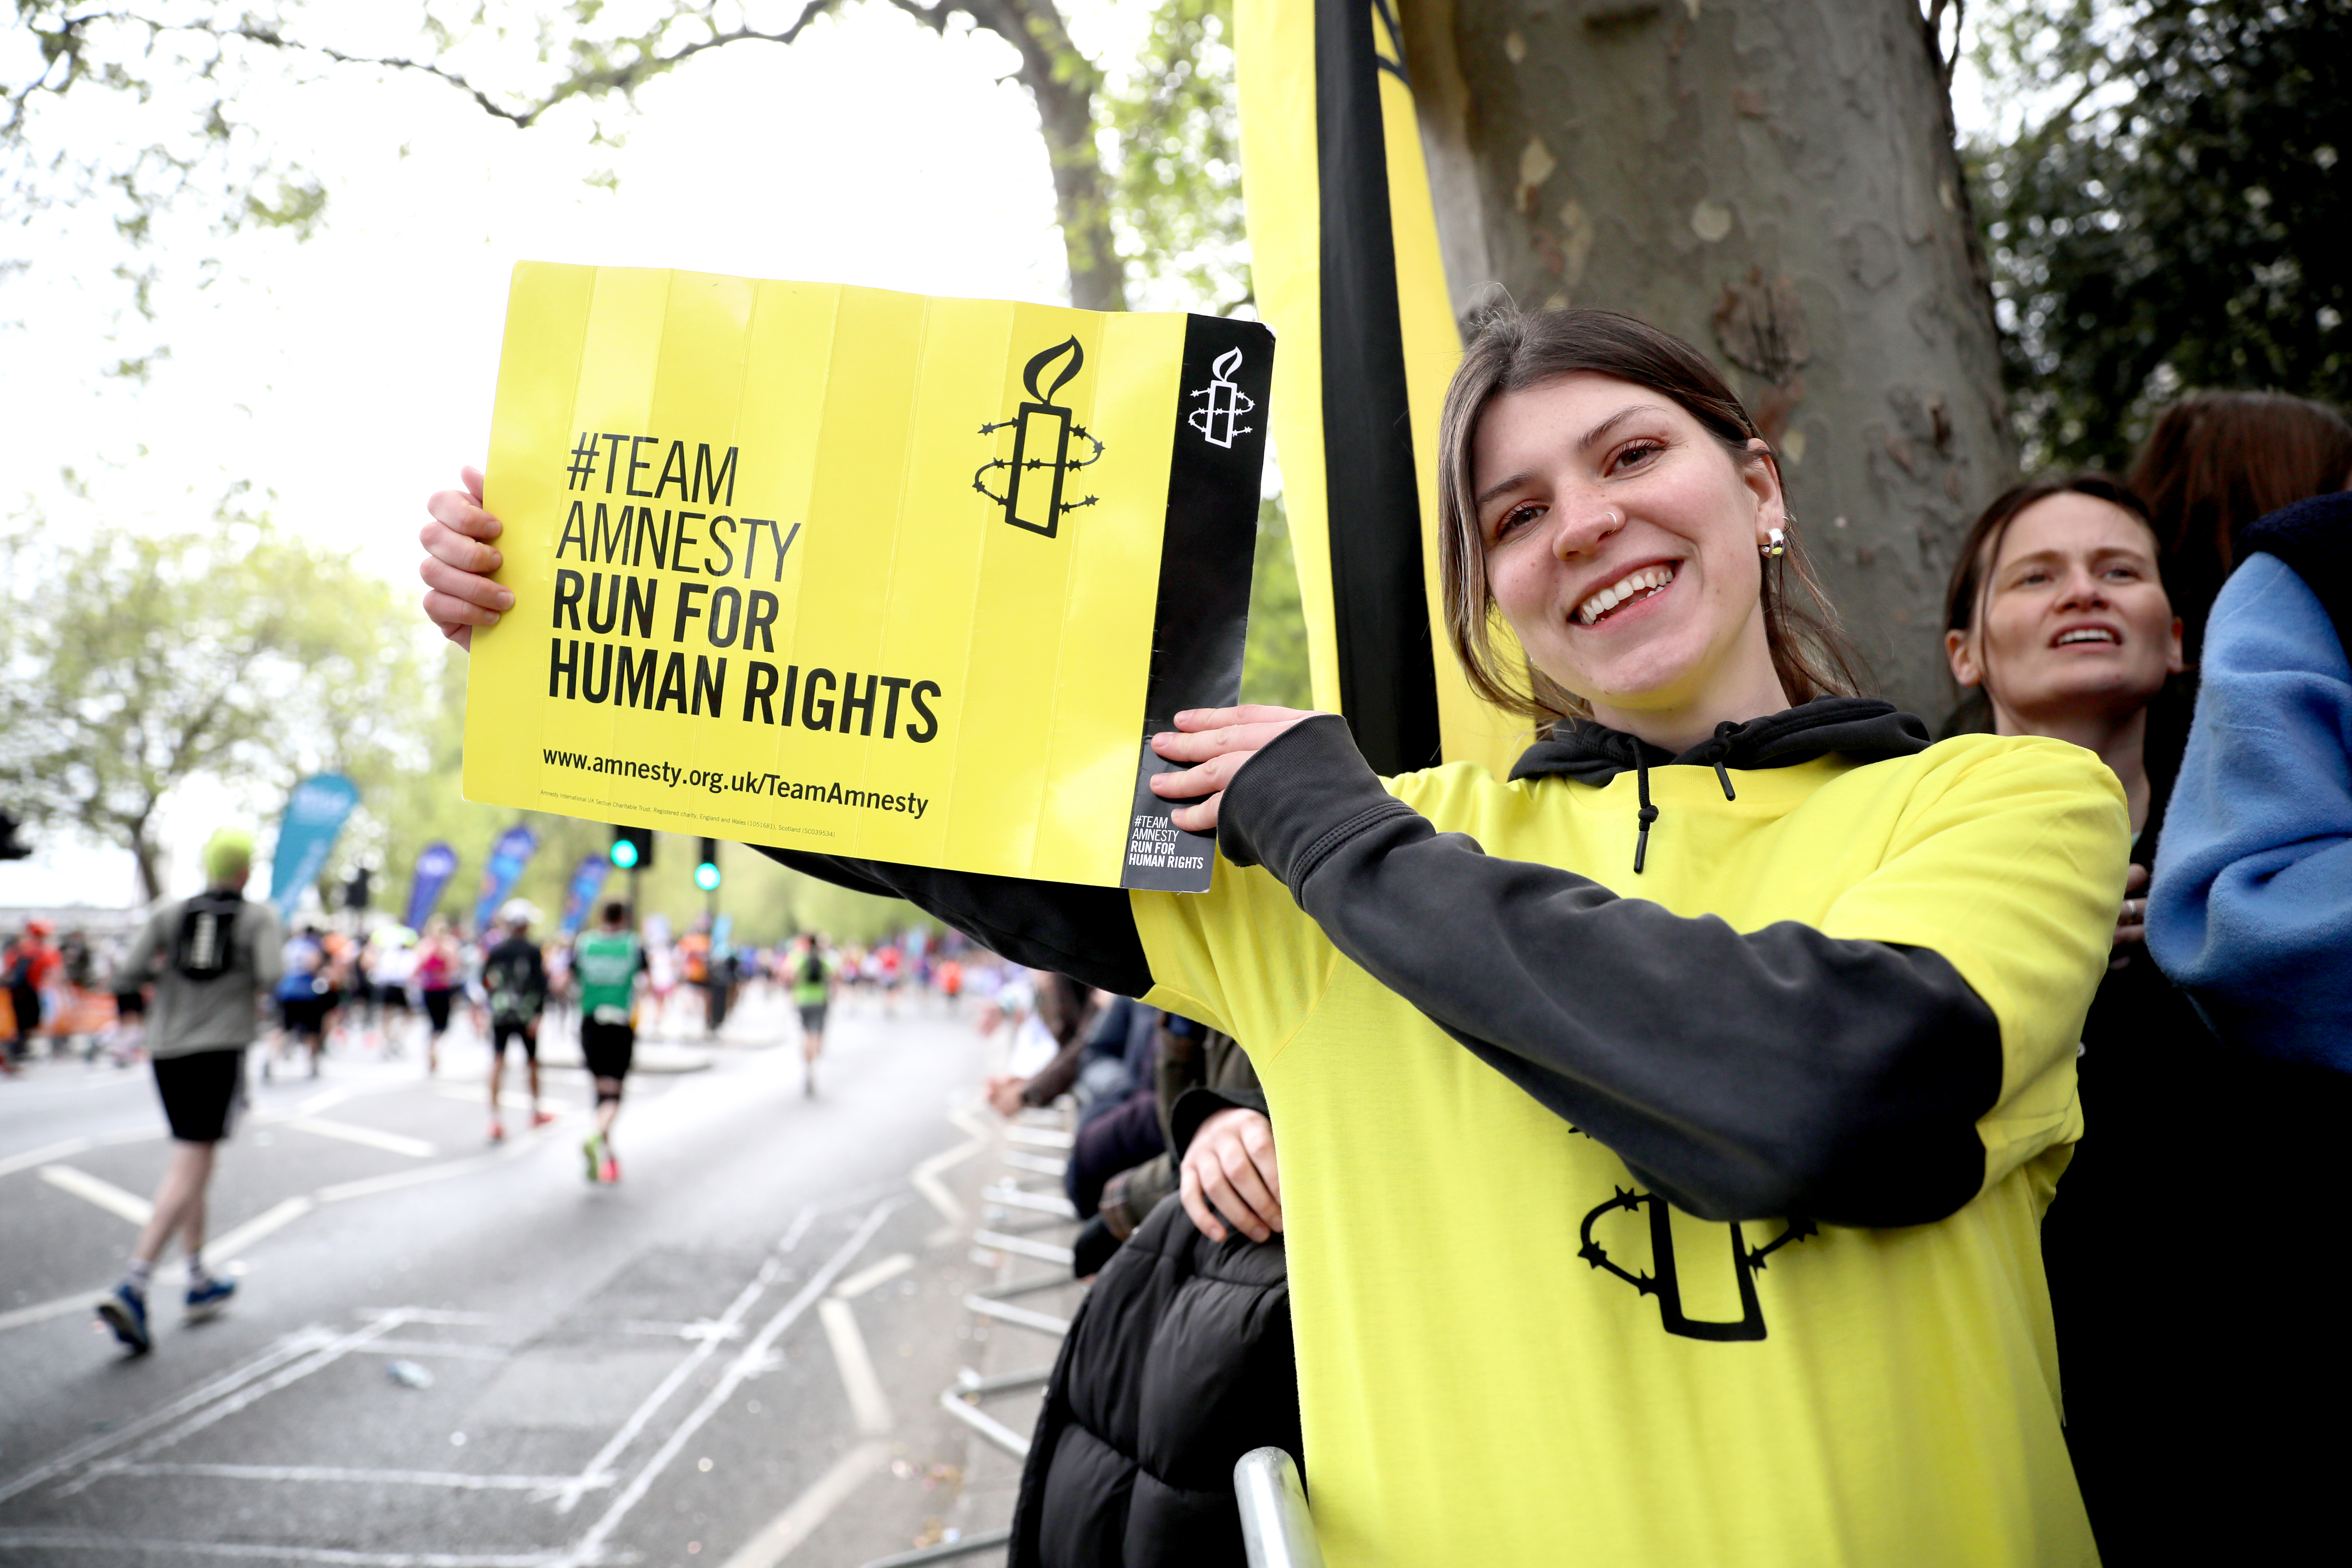 Amnesty Supporter Holding Placard in support of Team Amnesty at the London Marathon in a London Street